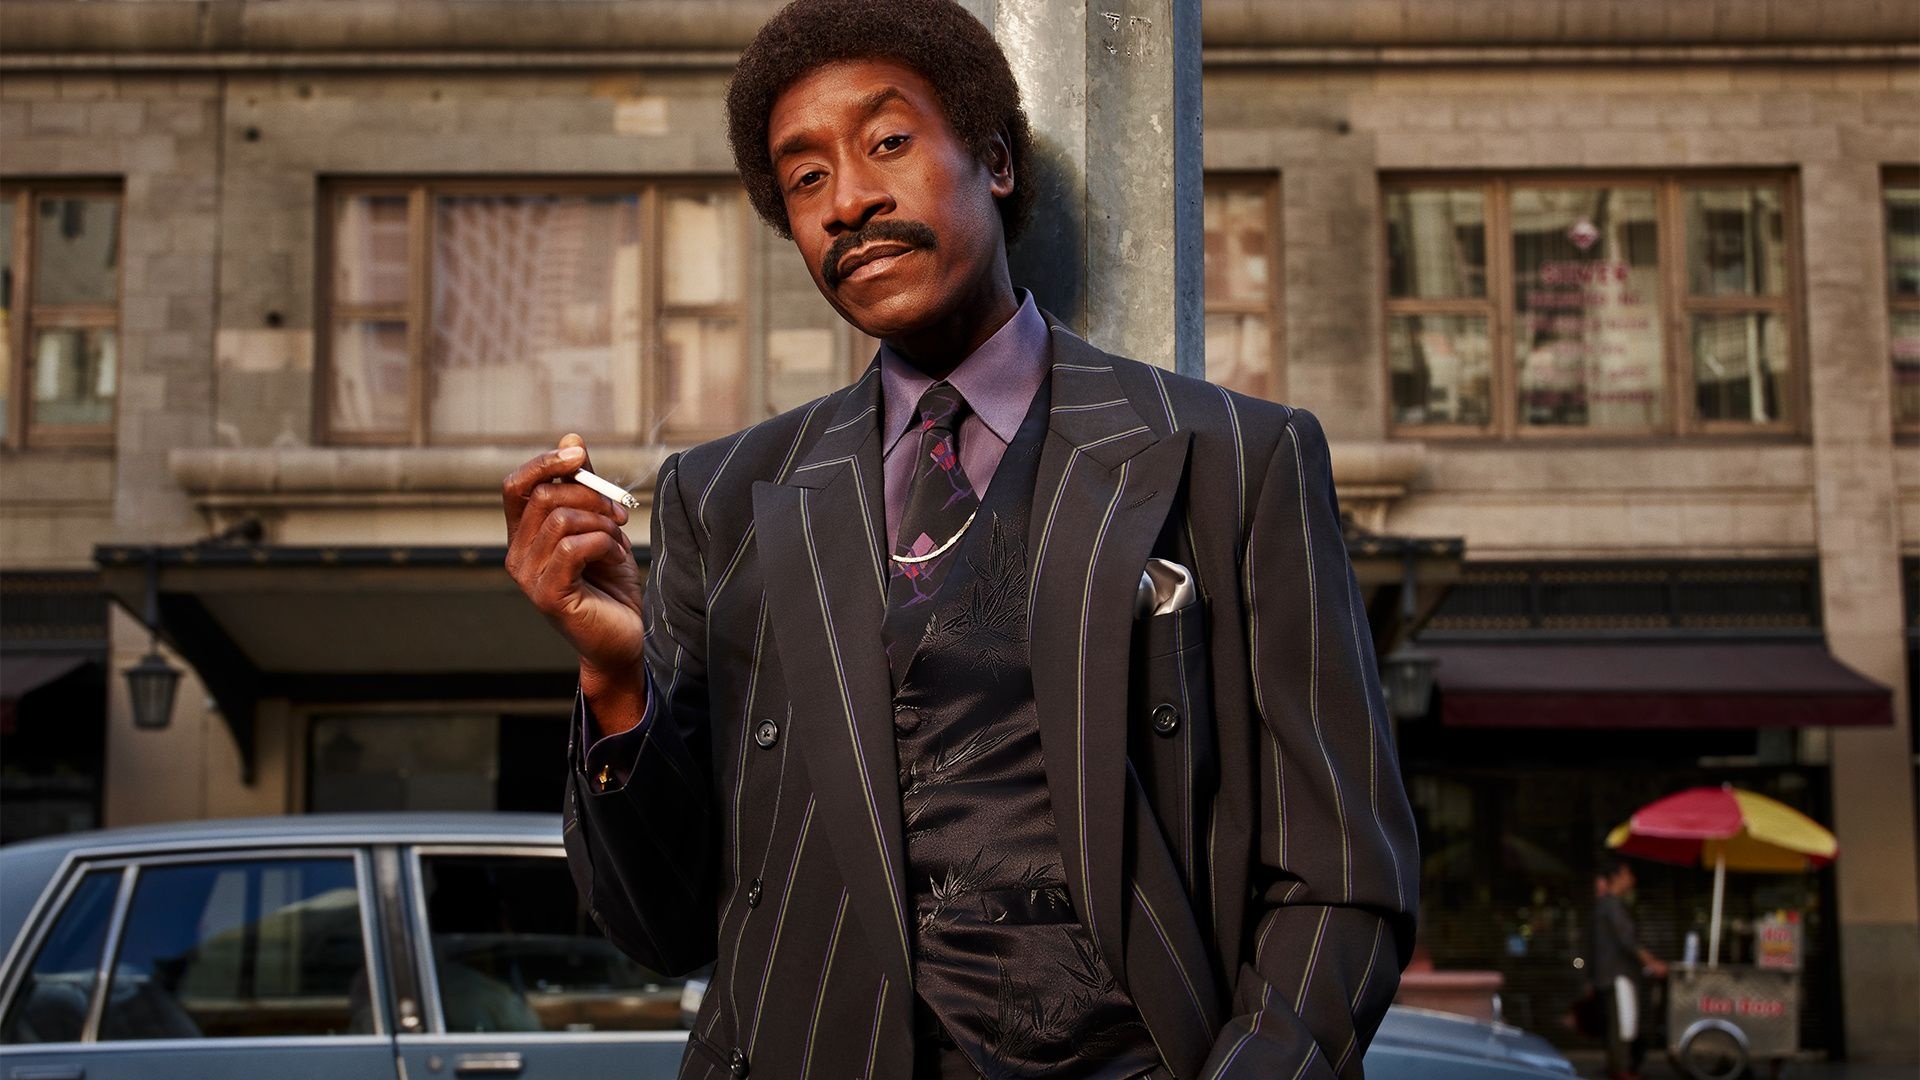 Don Cheadle's TV show, Fate of Marvel star, Black Monday confirmed, Exciting news, 1920x1080 Full HD Desktop